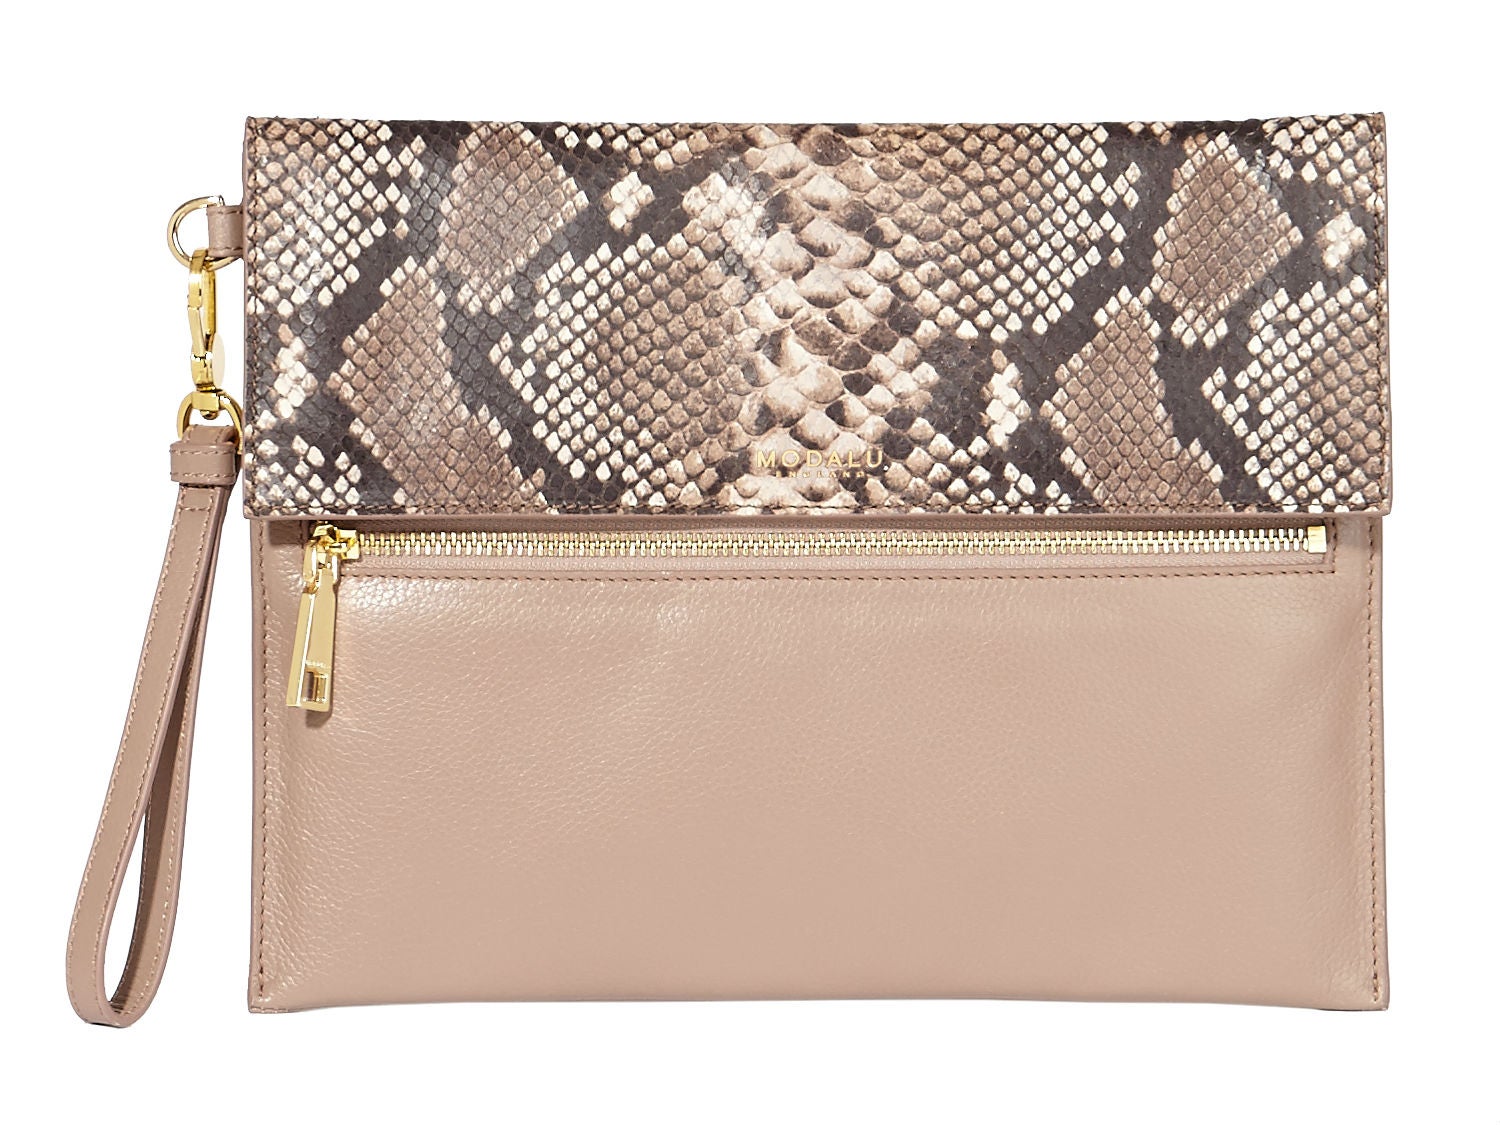 The Erin clutch will be reduced to £39 from £99